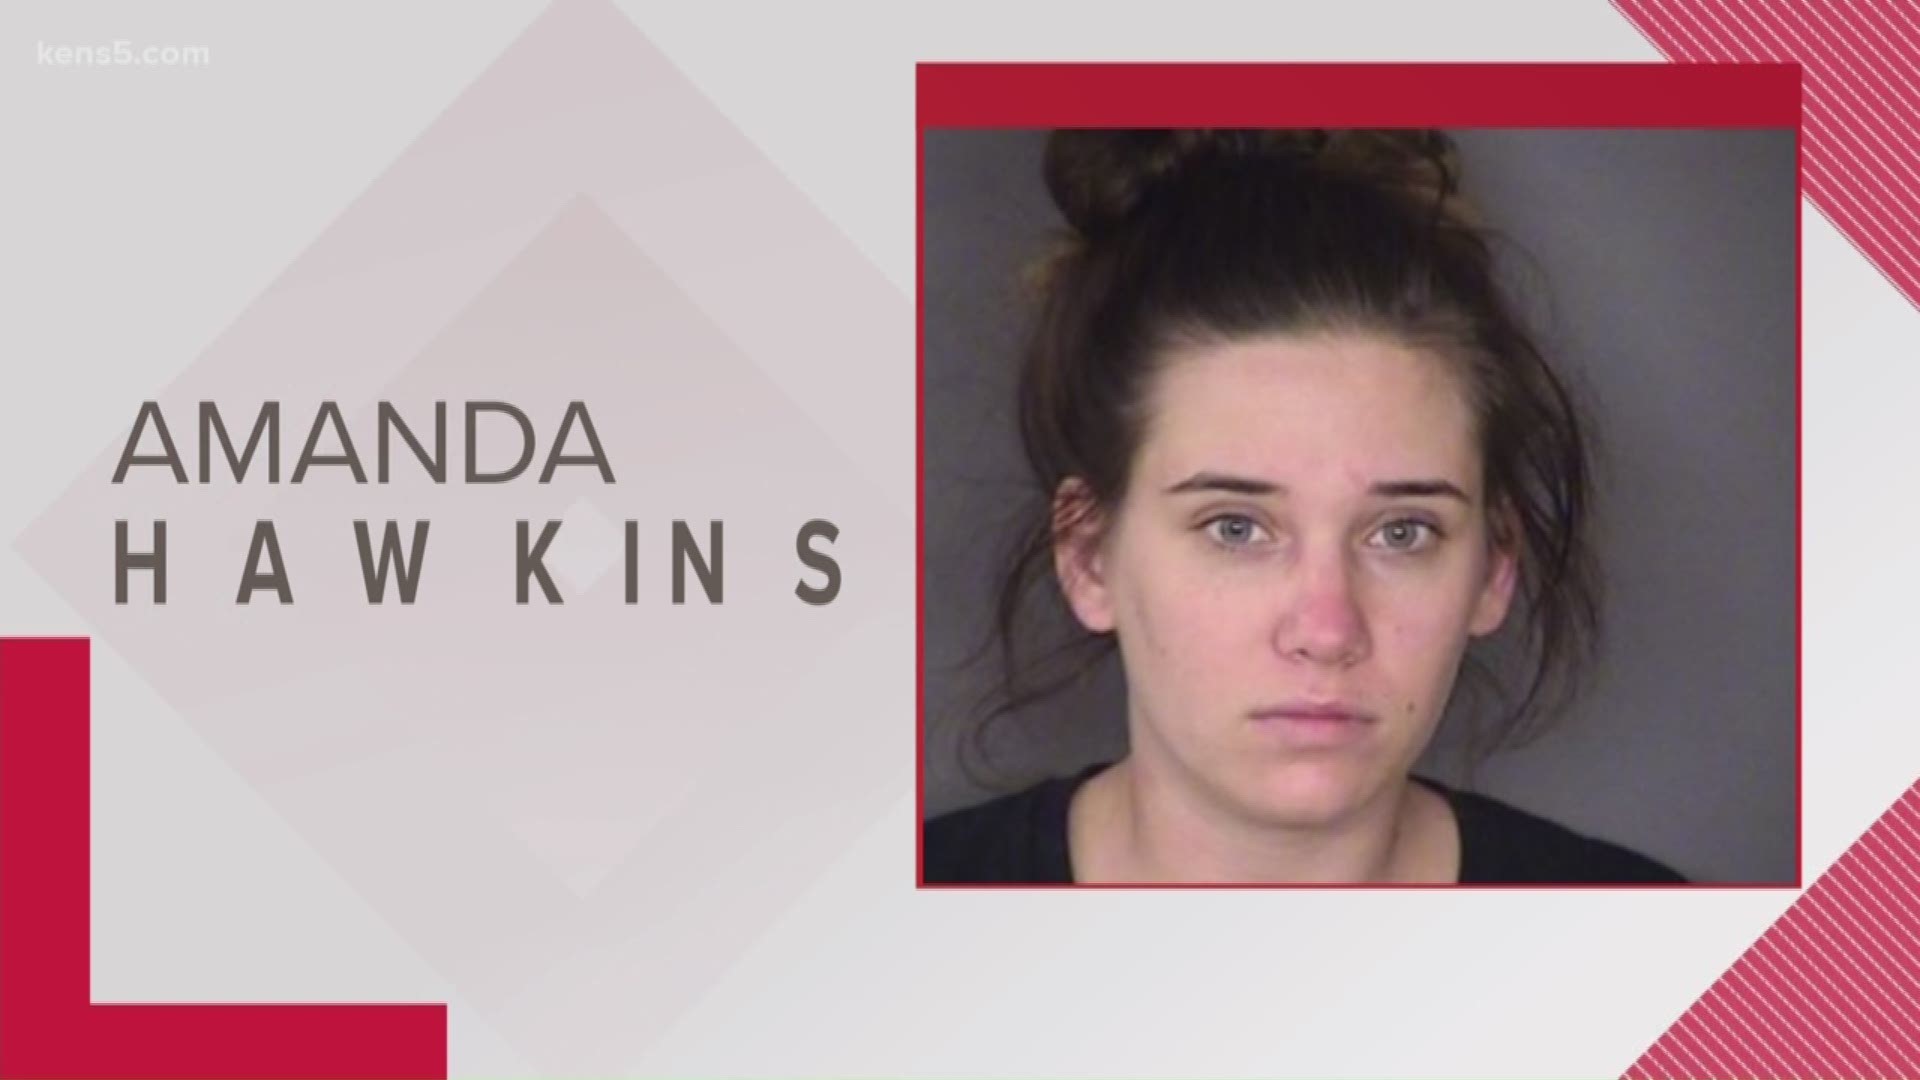 Amanda Hawkins was arrested and accused of leaving her two young daughters in her car back in June 2017 while she was inside a friend's residence.